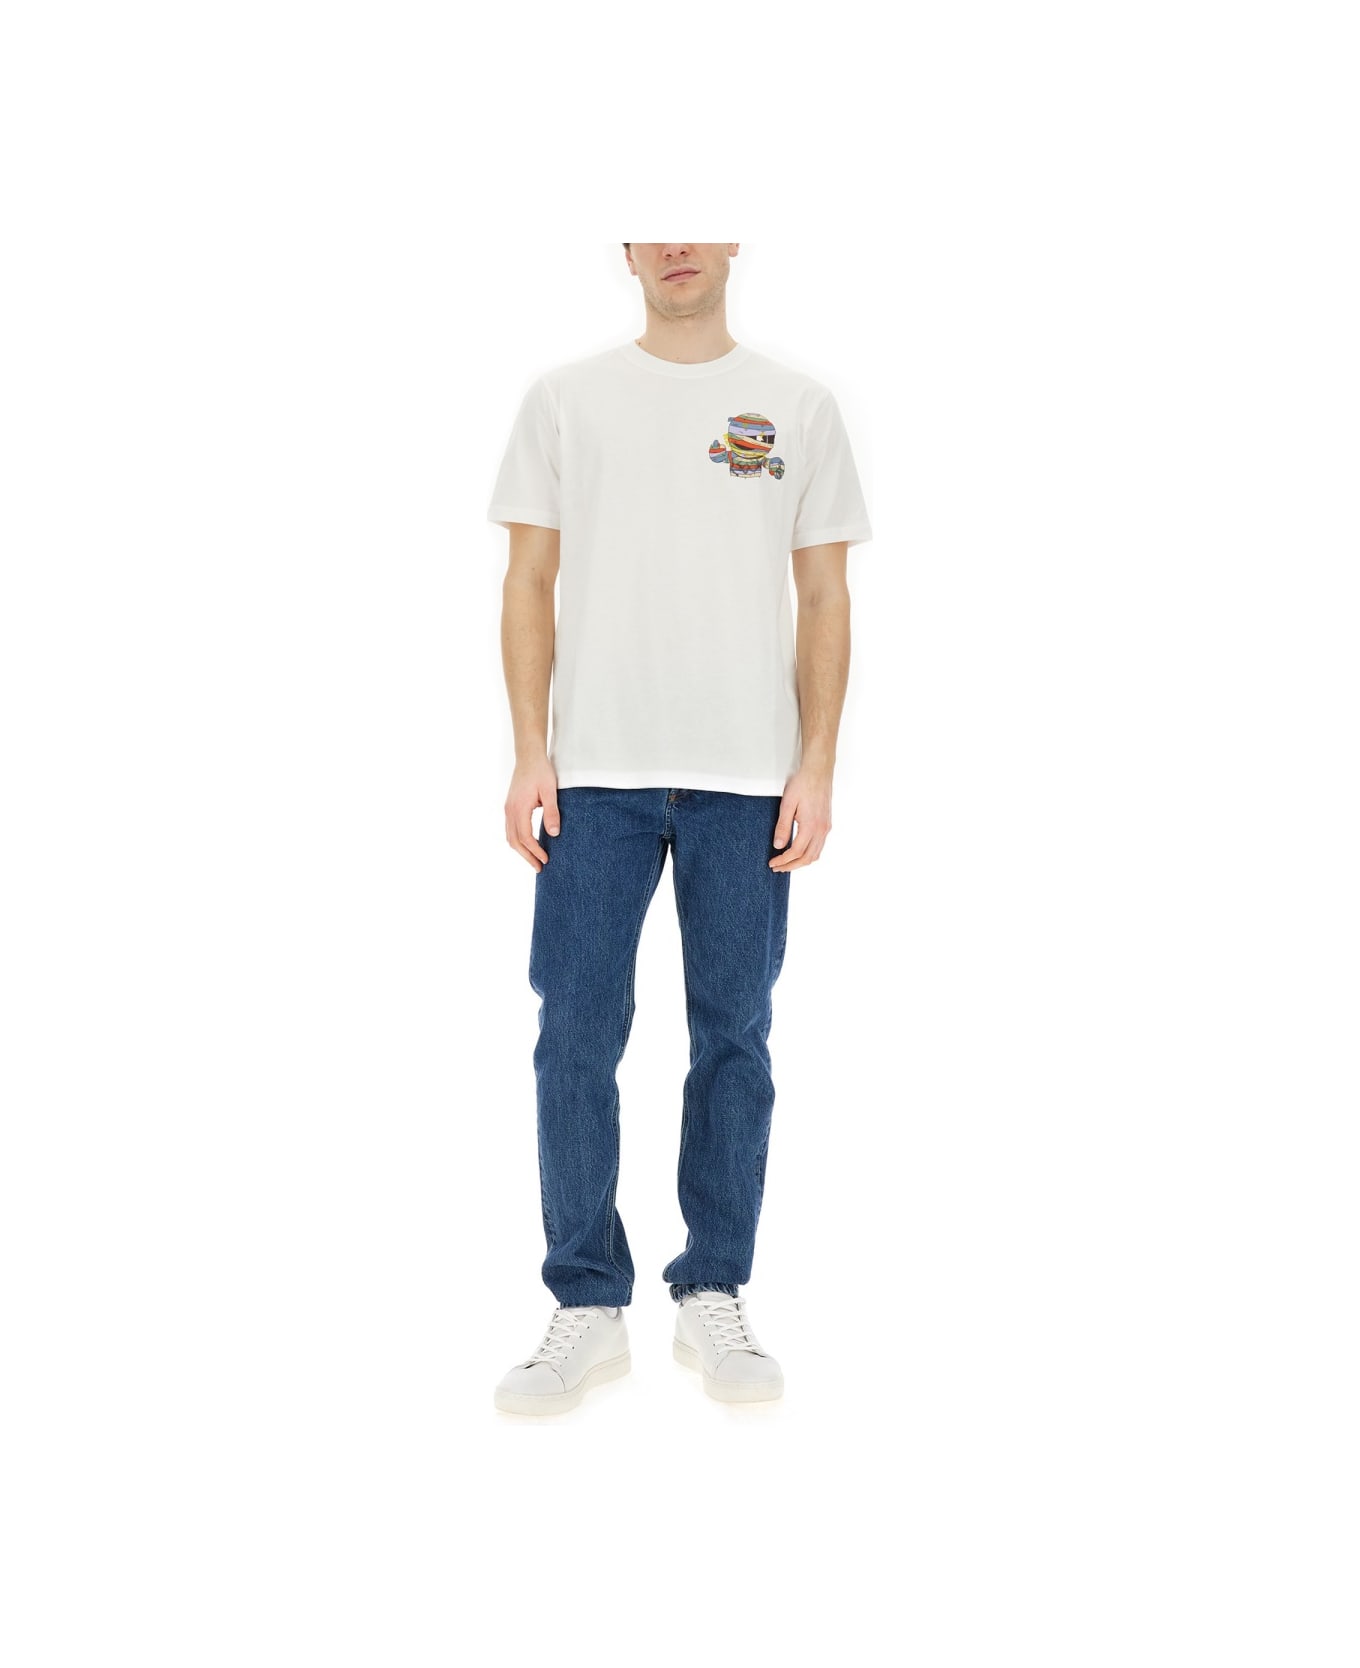 PS by Paul Smith Regular Fit T-shirt - WHITE シャツ